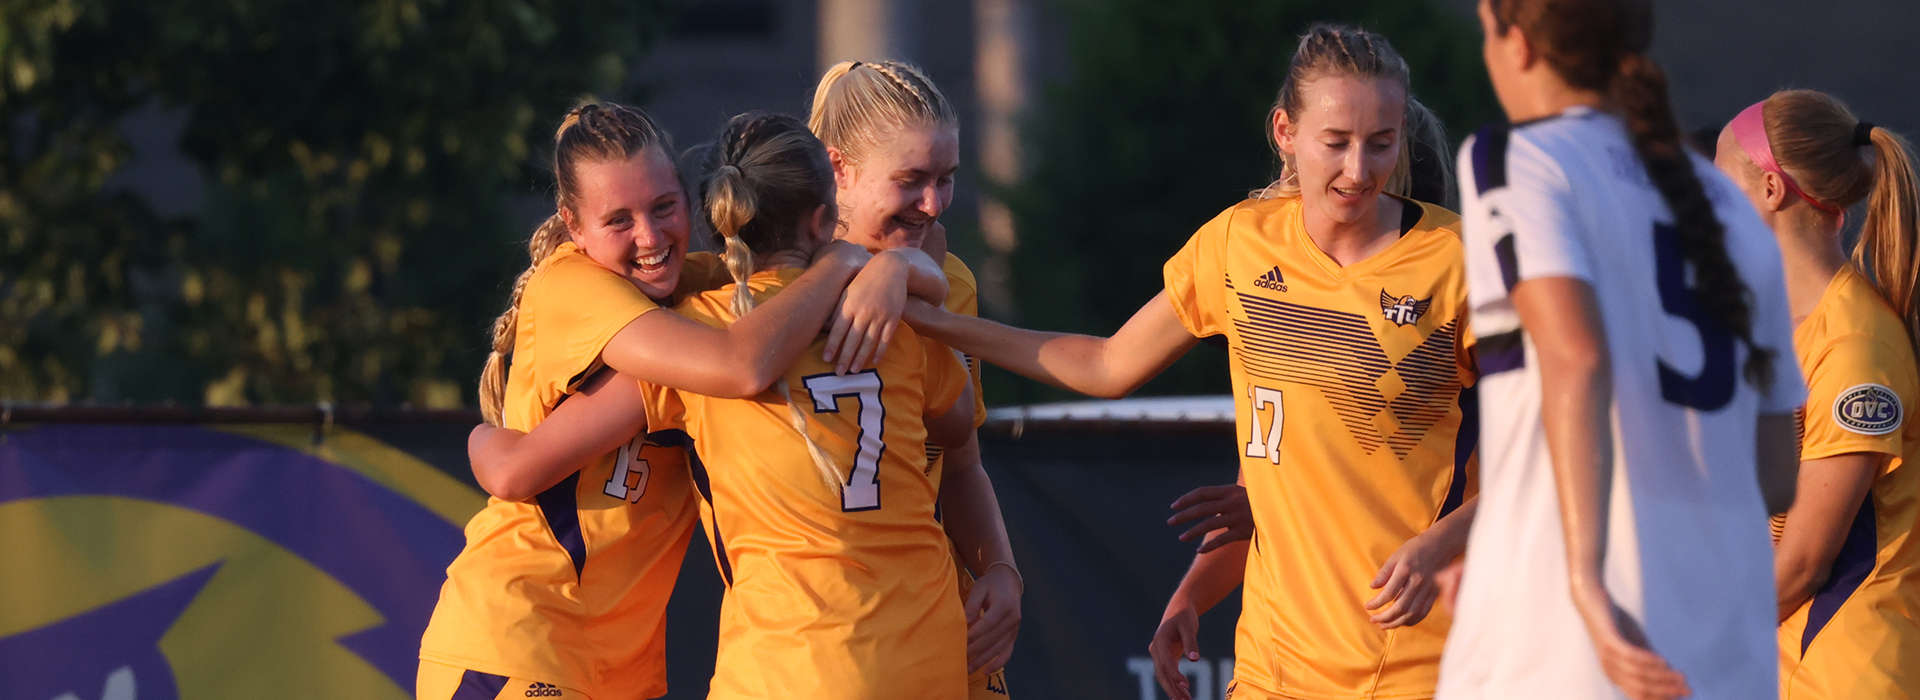 Golden Eagles secure first win of 2023 behind season-high attack against Bisons